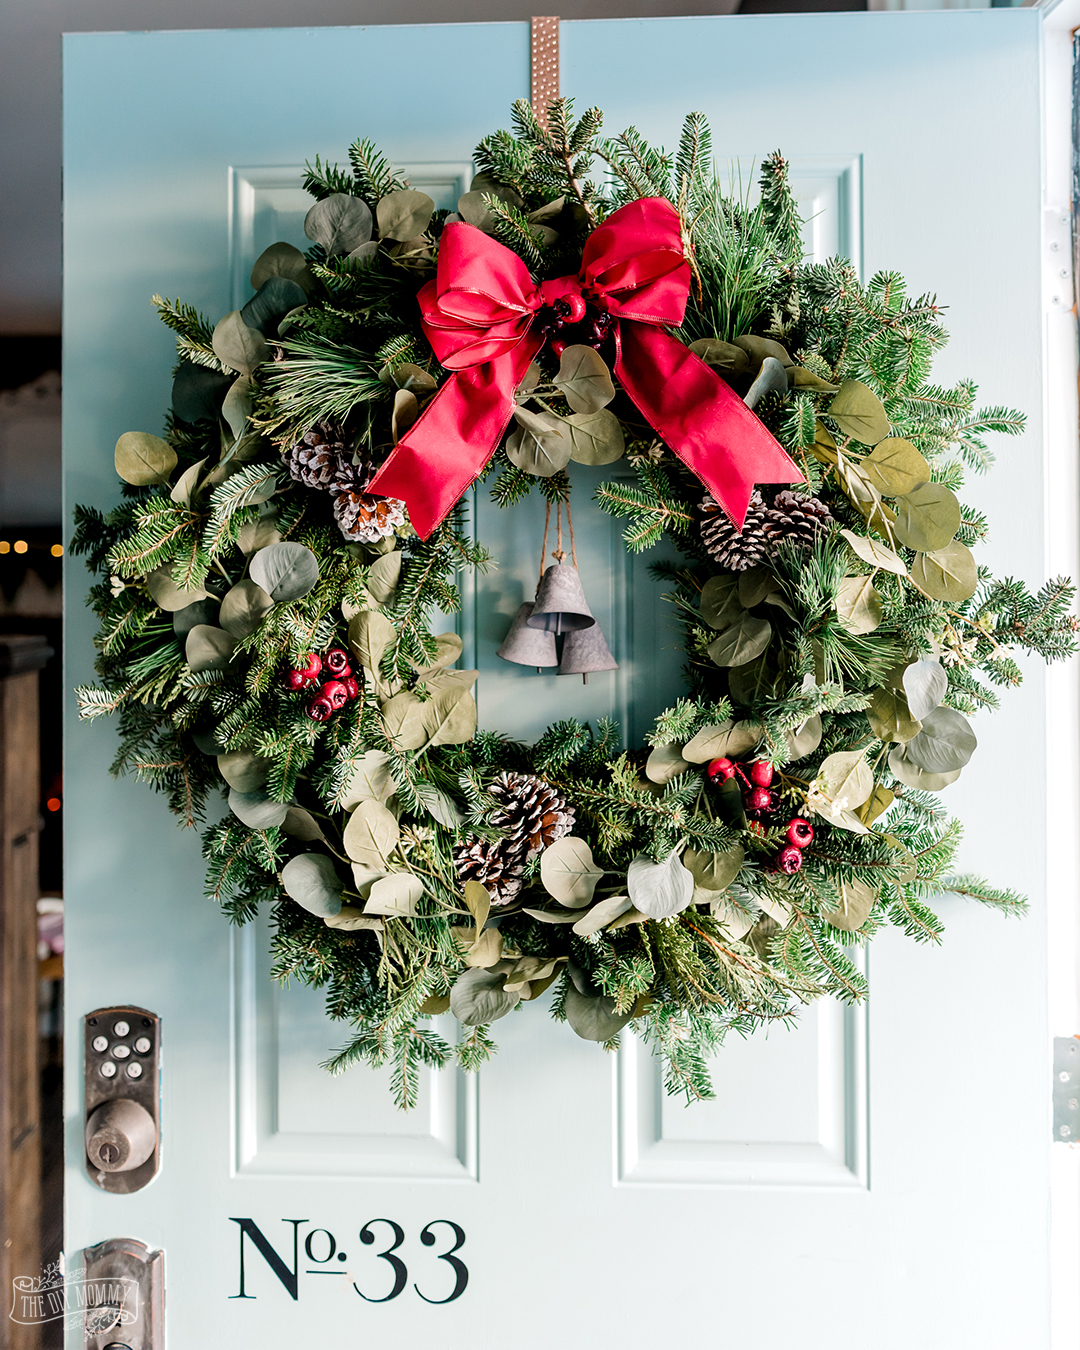 Learn how to put together a fresh greenery Christmas wreath that looks full and gorgeous with this easy wreath hack!